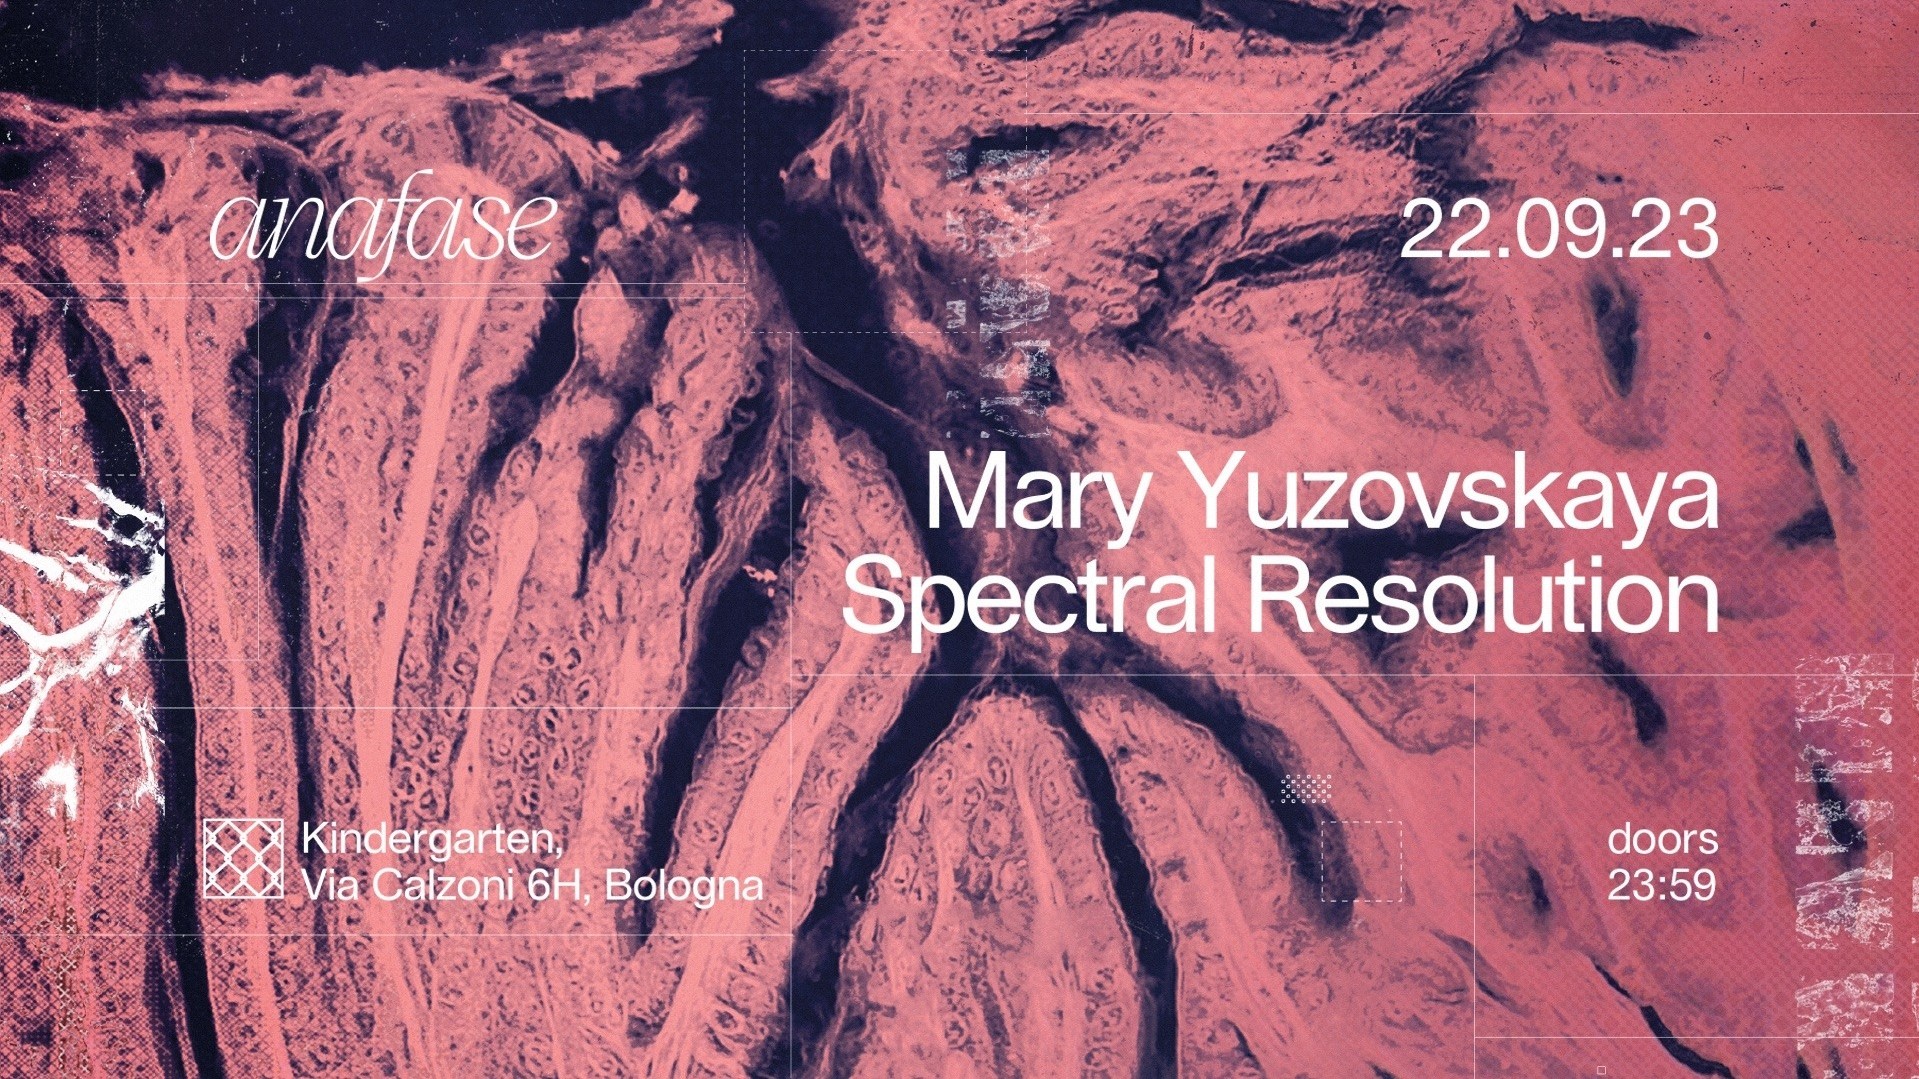 anafase with Mary Yuzovskaya, Spectral Resolution